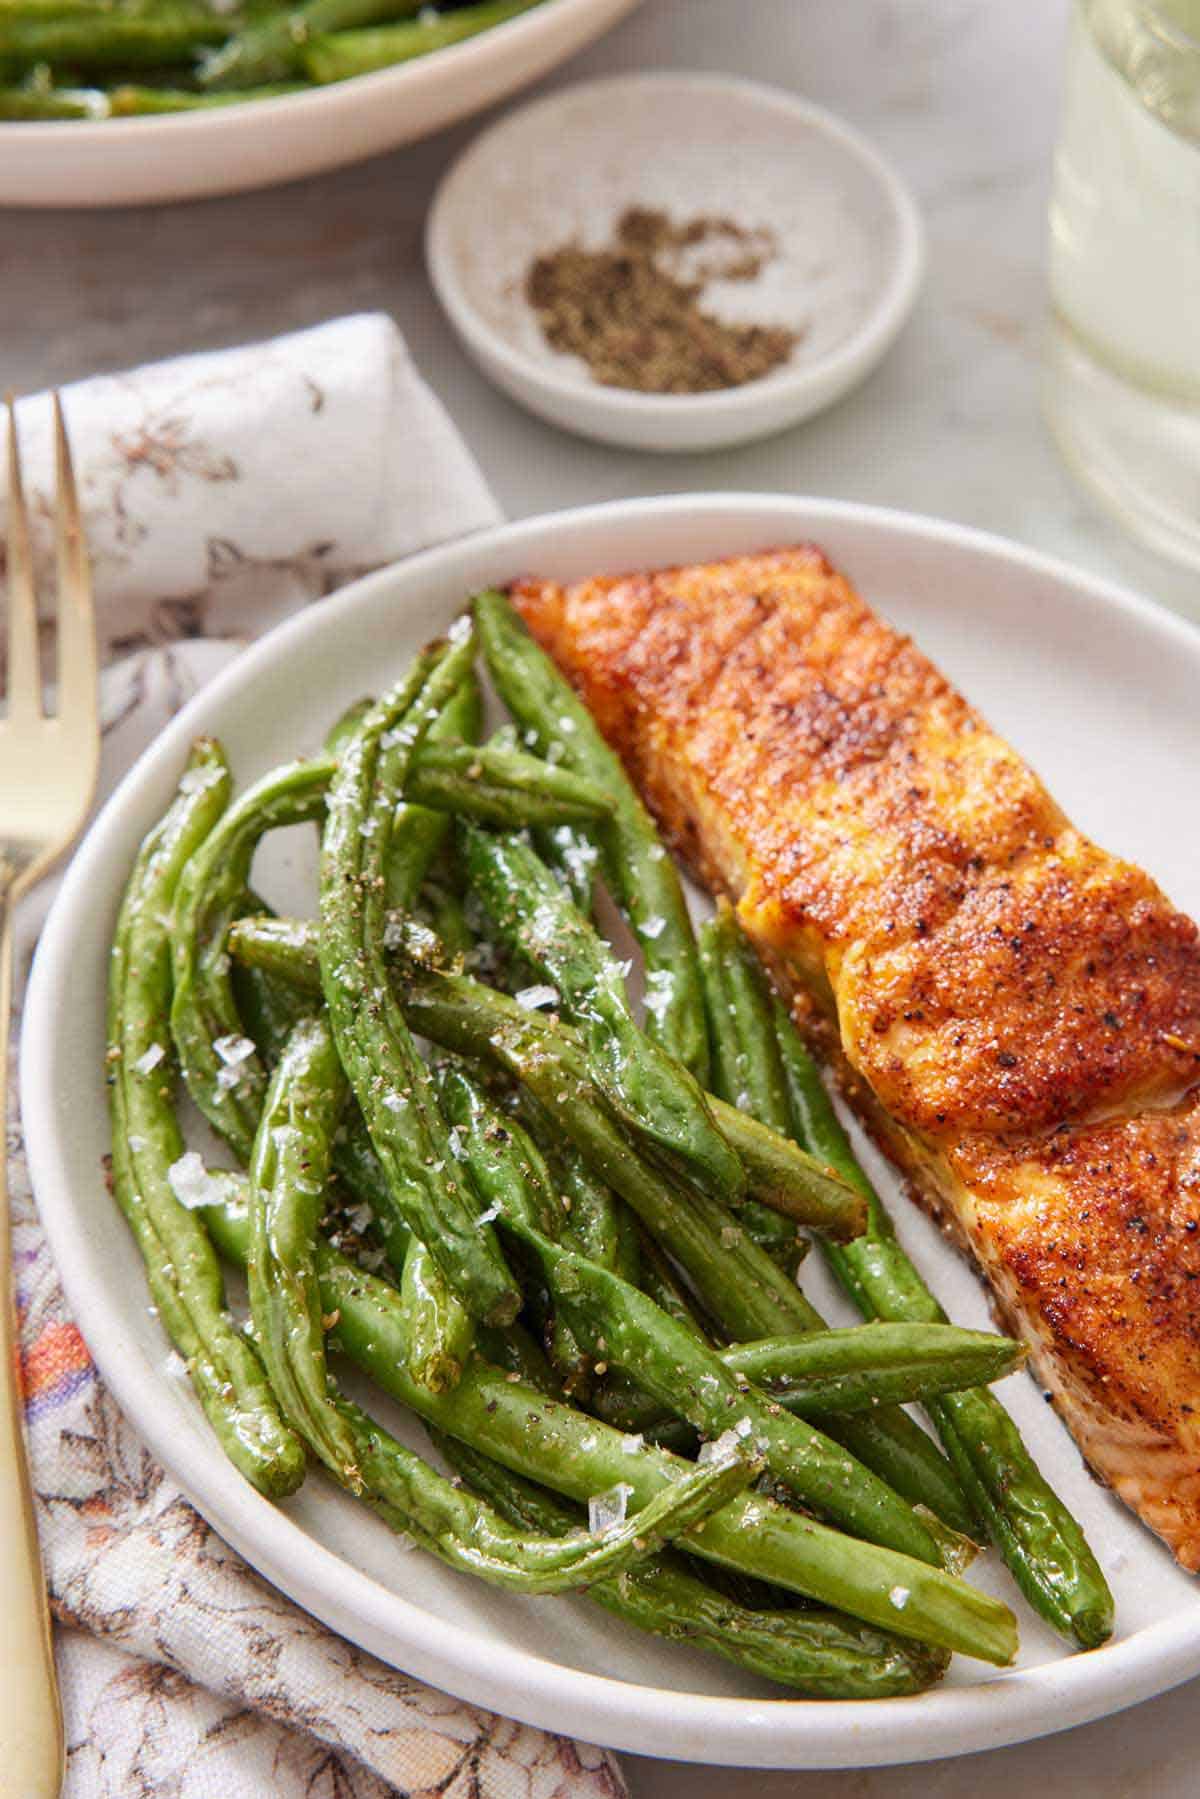 A plate with air fryer green beans with salmon. A small bowl of pepper and a drink in the background.